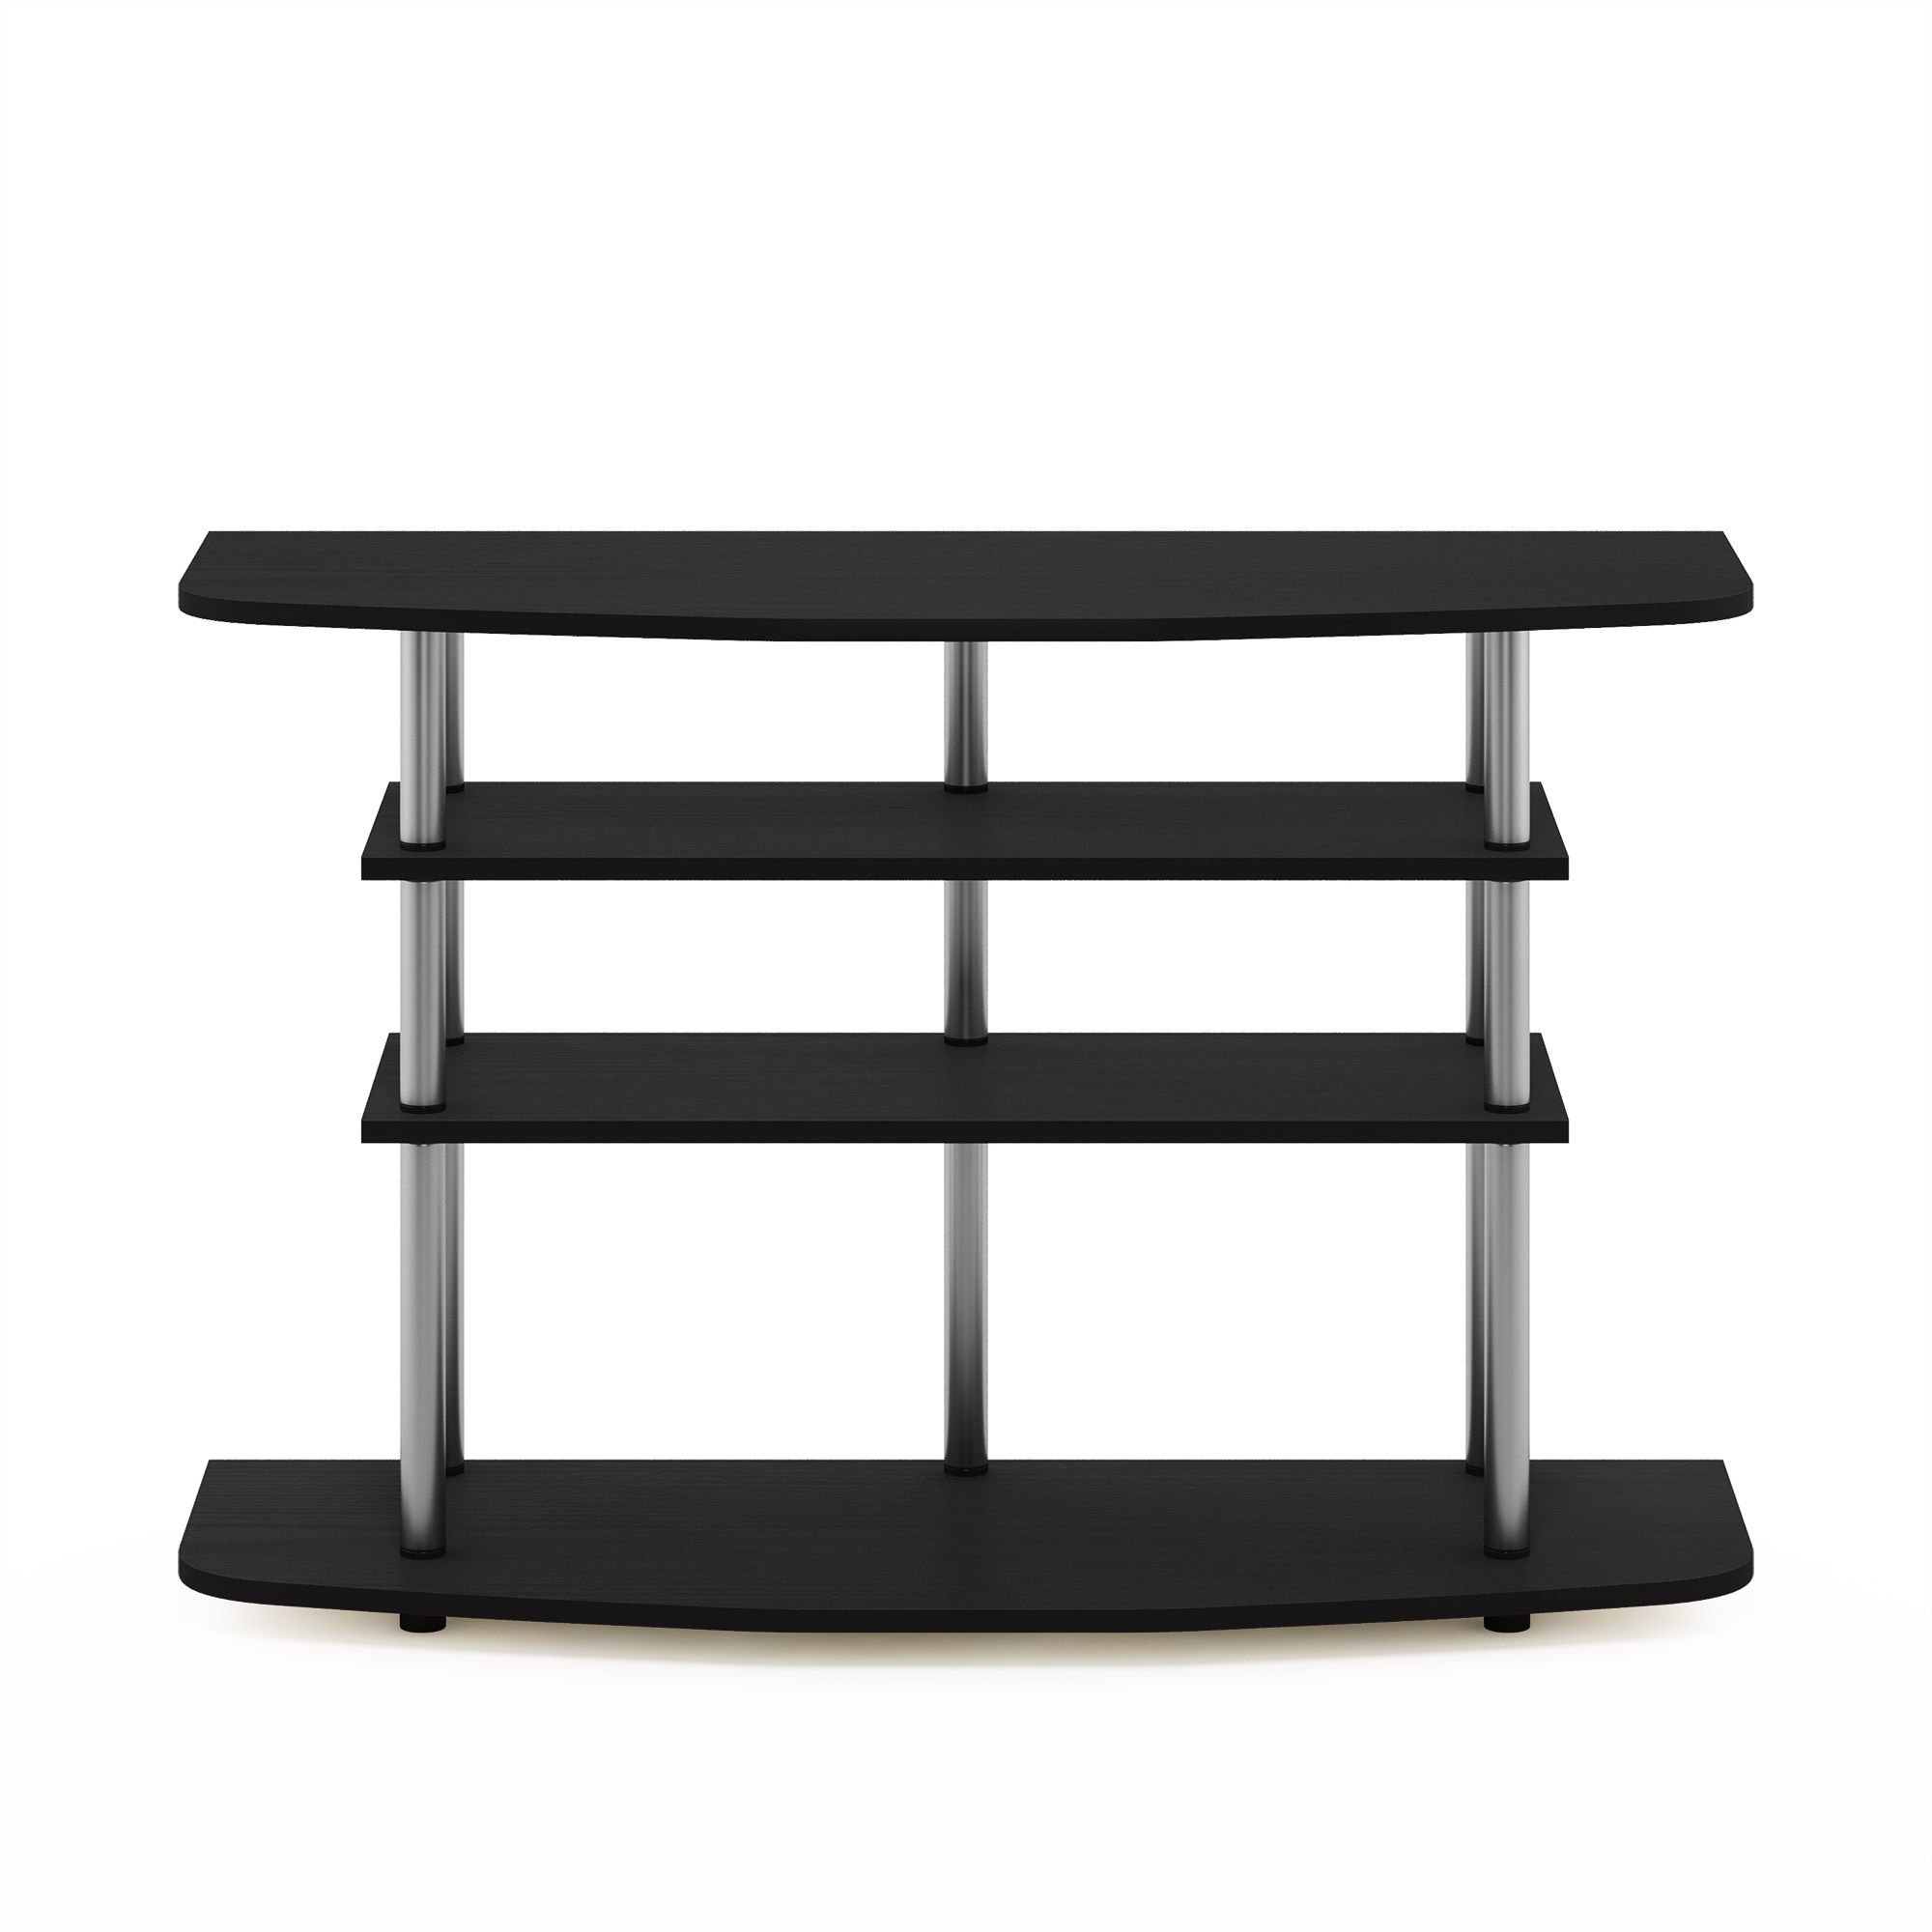 Furinno Frans Turn N Tube 4 Tier Tv Stand For Tv Up To 46 With Regard To Furinno Jaya Large Tv Stands With Storage Bin (Gallery 7 of 20)